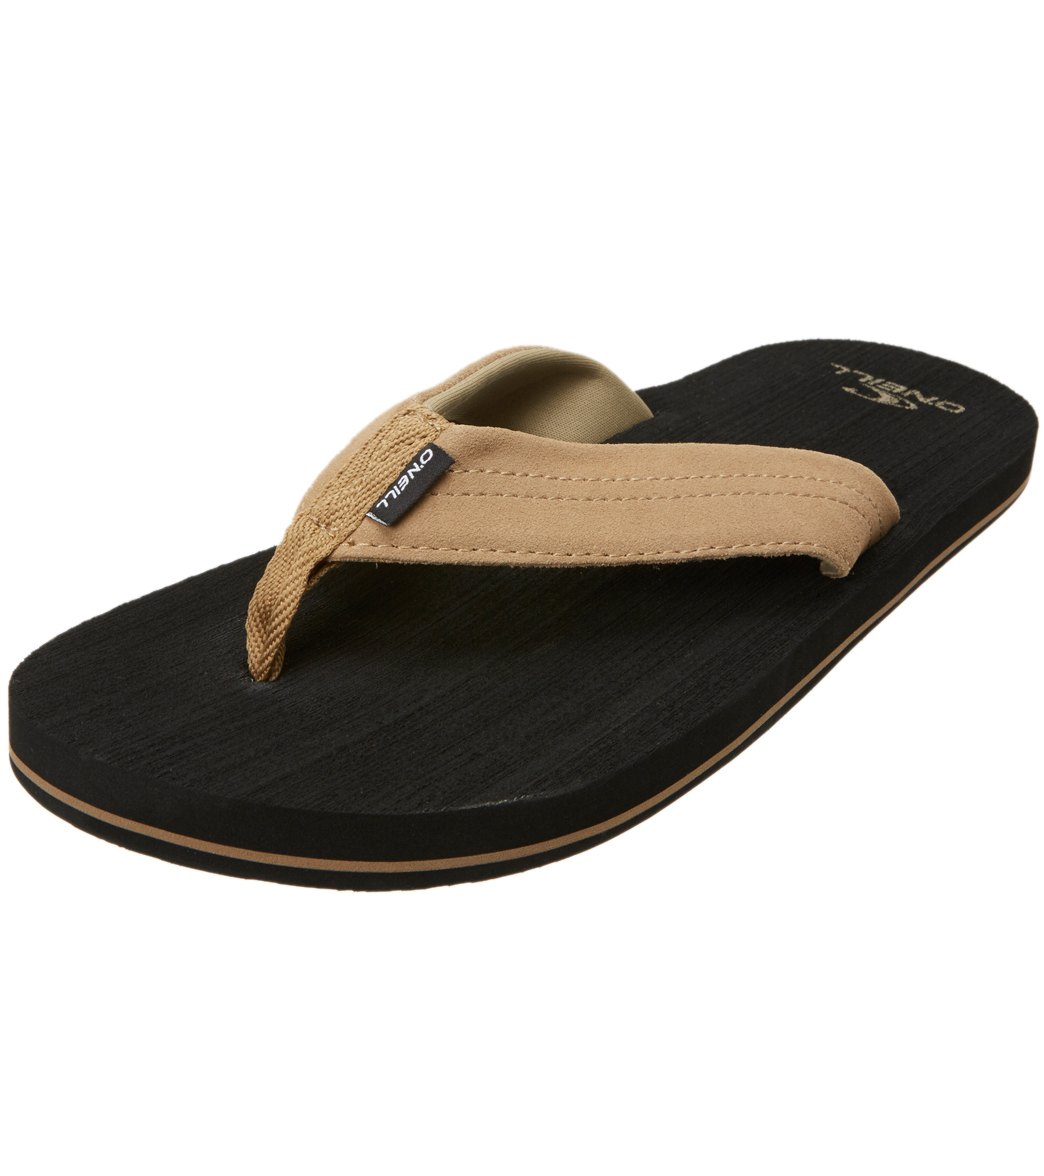 O'Neill Men's Doheny Flip Flop at 